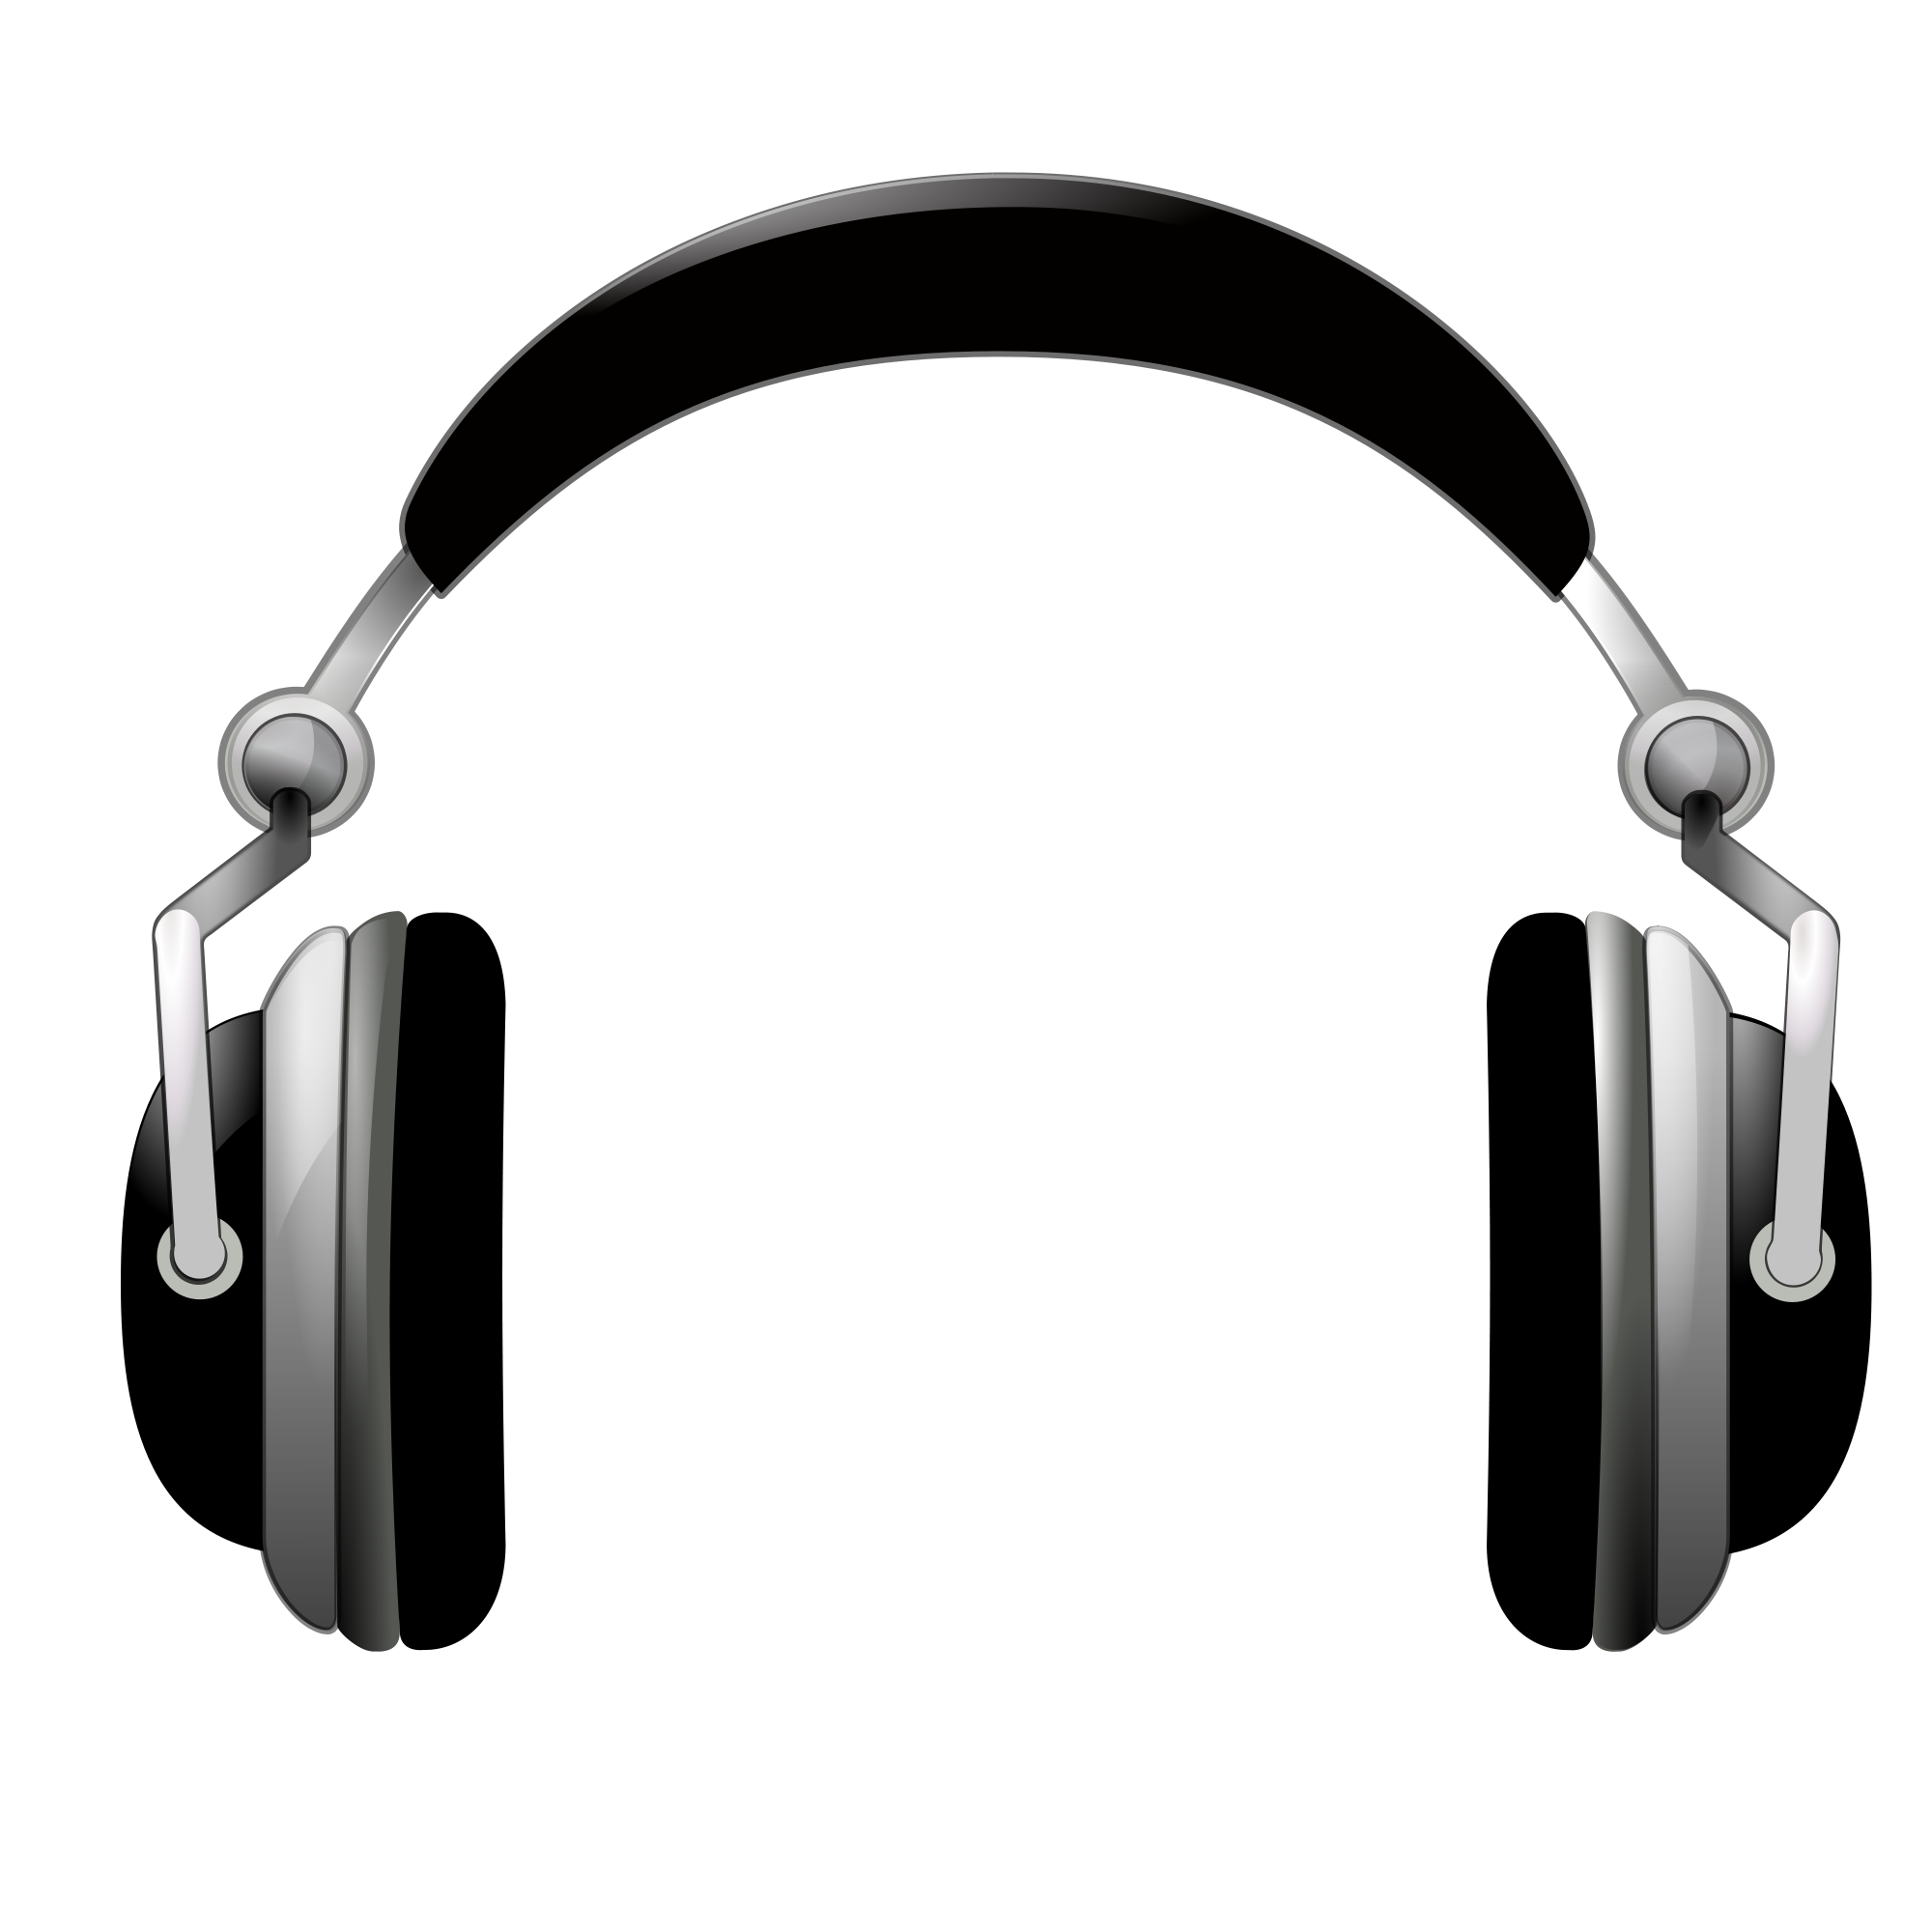 Headphones Picture PNG Image, Headphones HD PNG - Free PNG